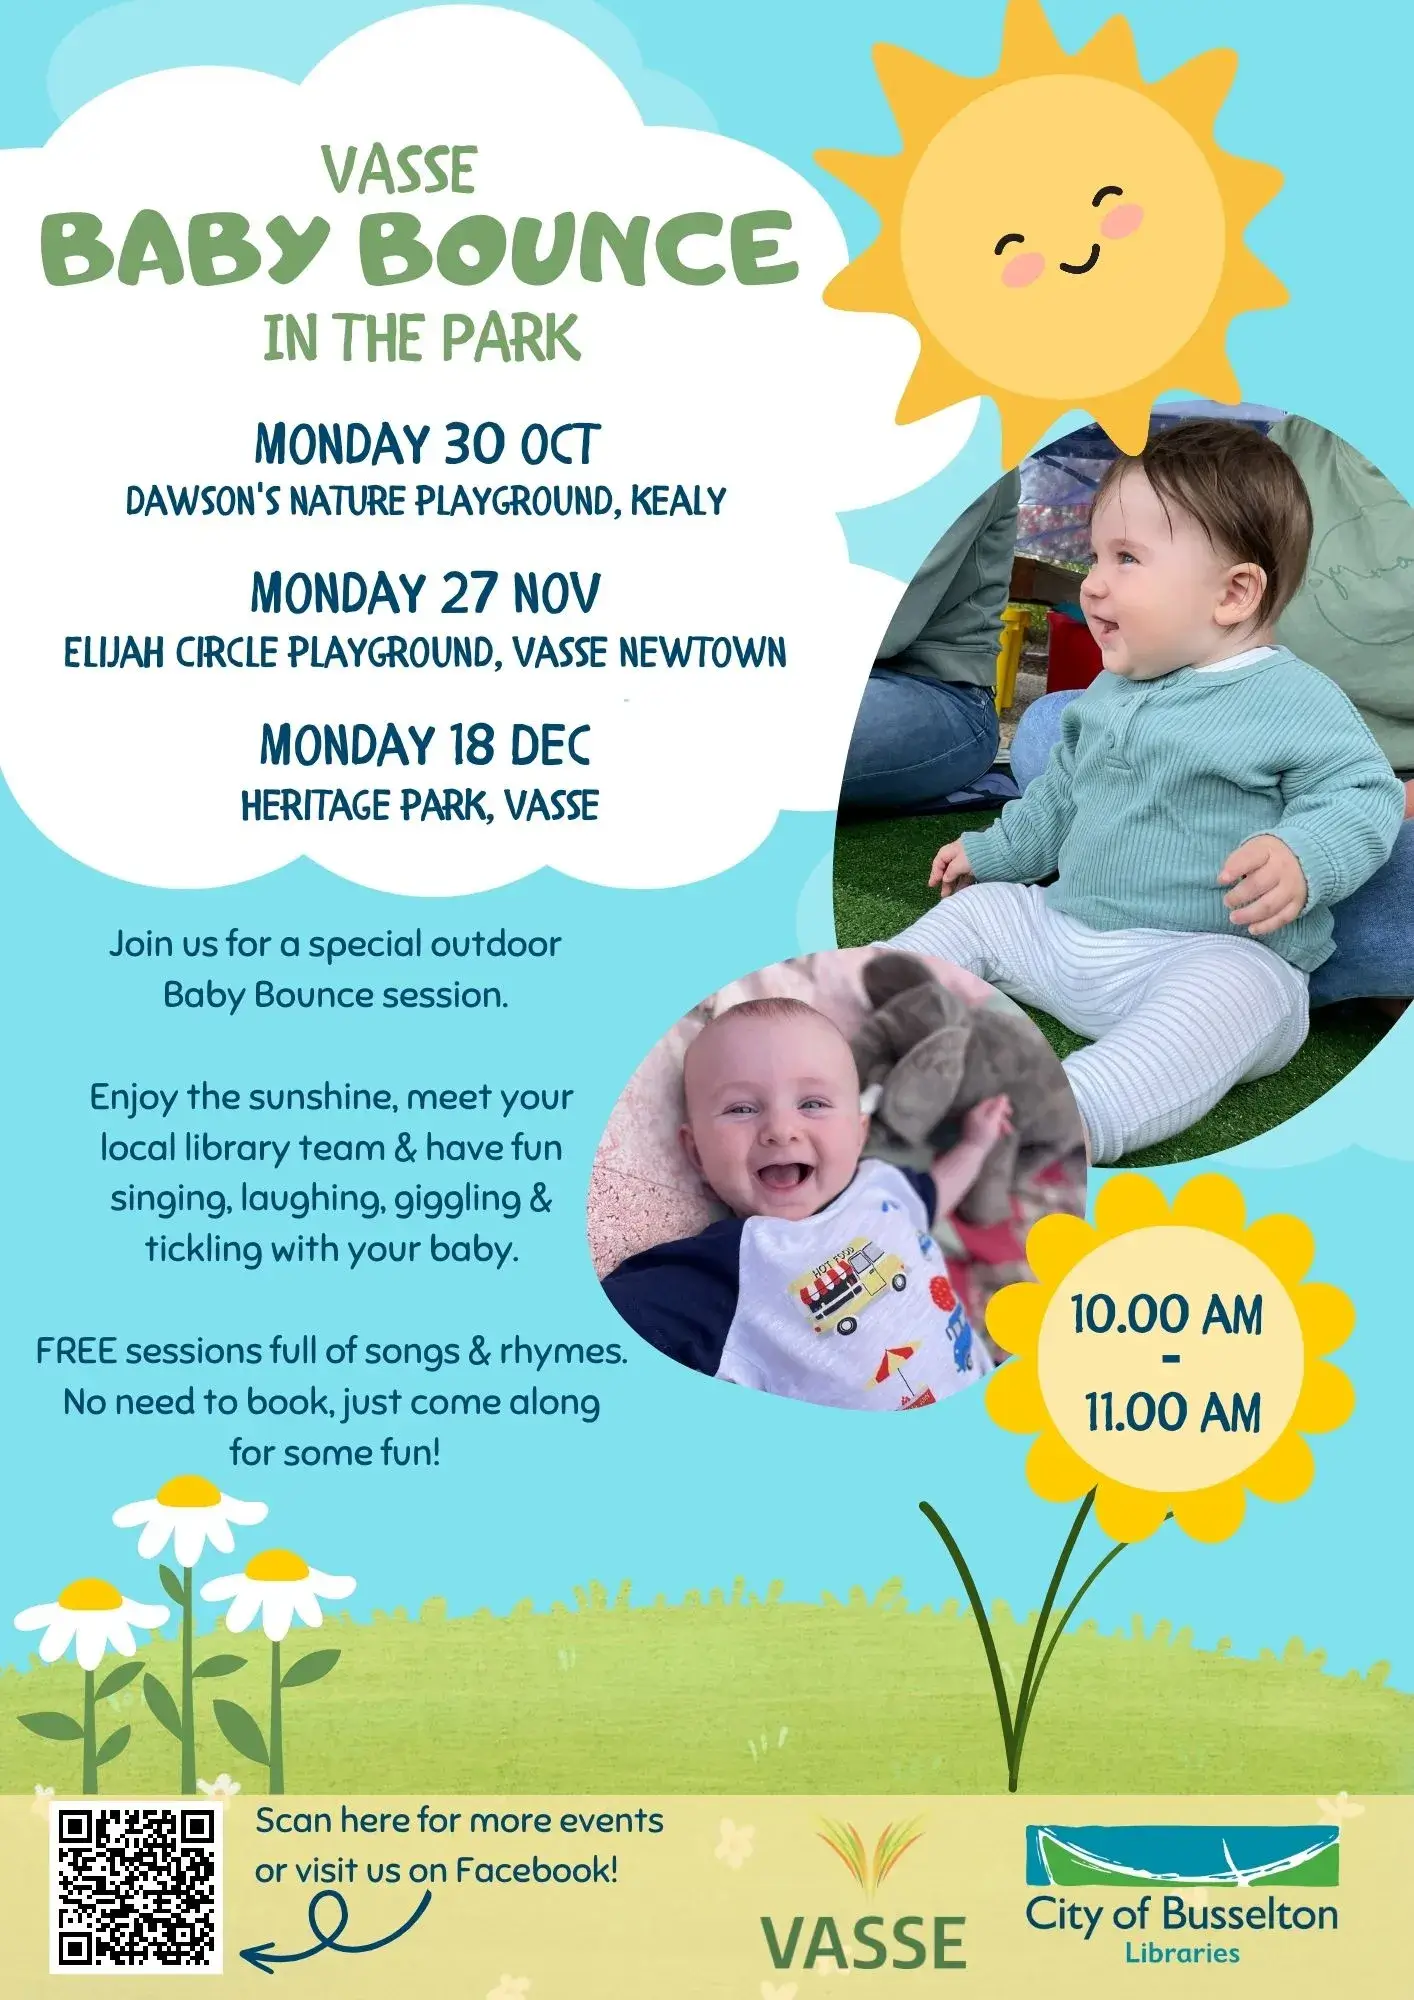 A promotional poster for Vasse Baby Bounce in the Park.